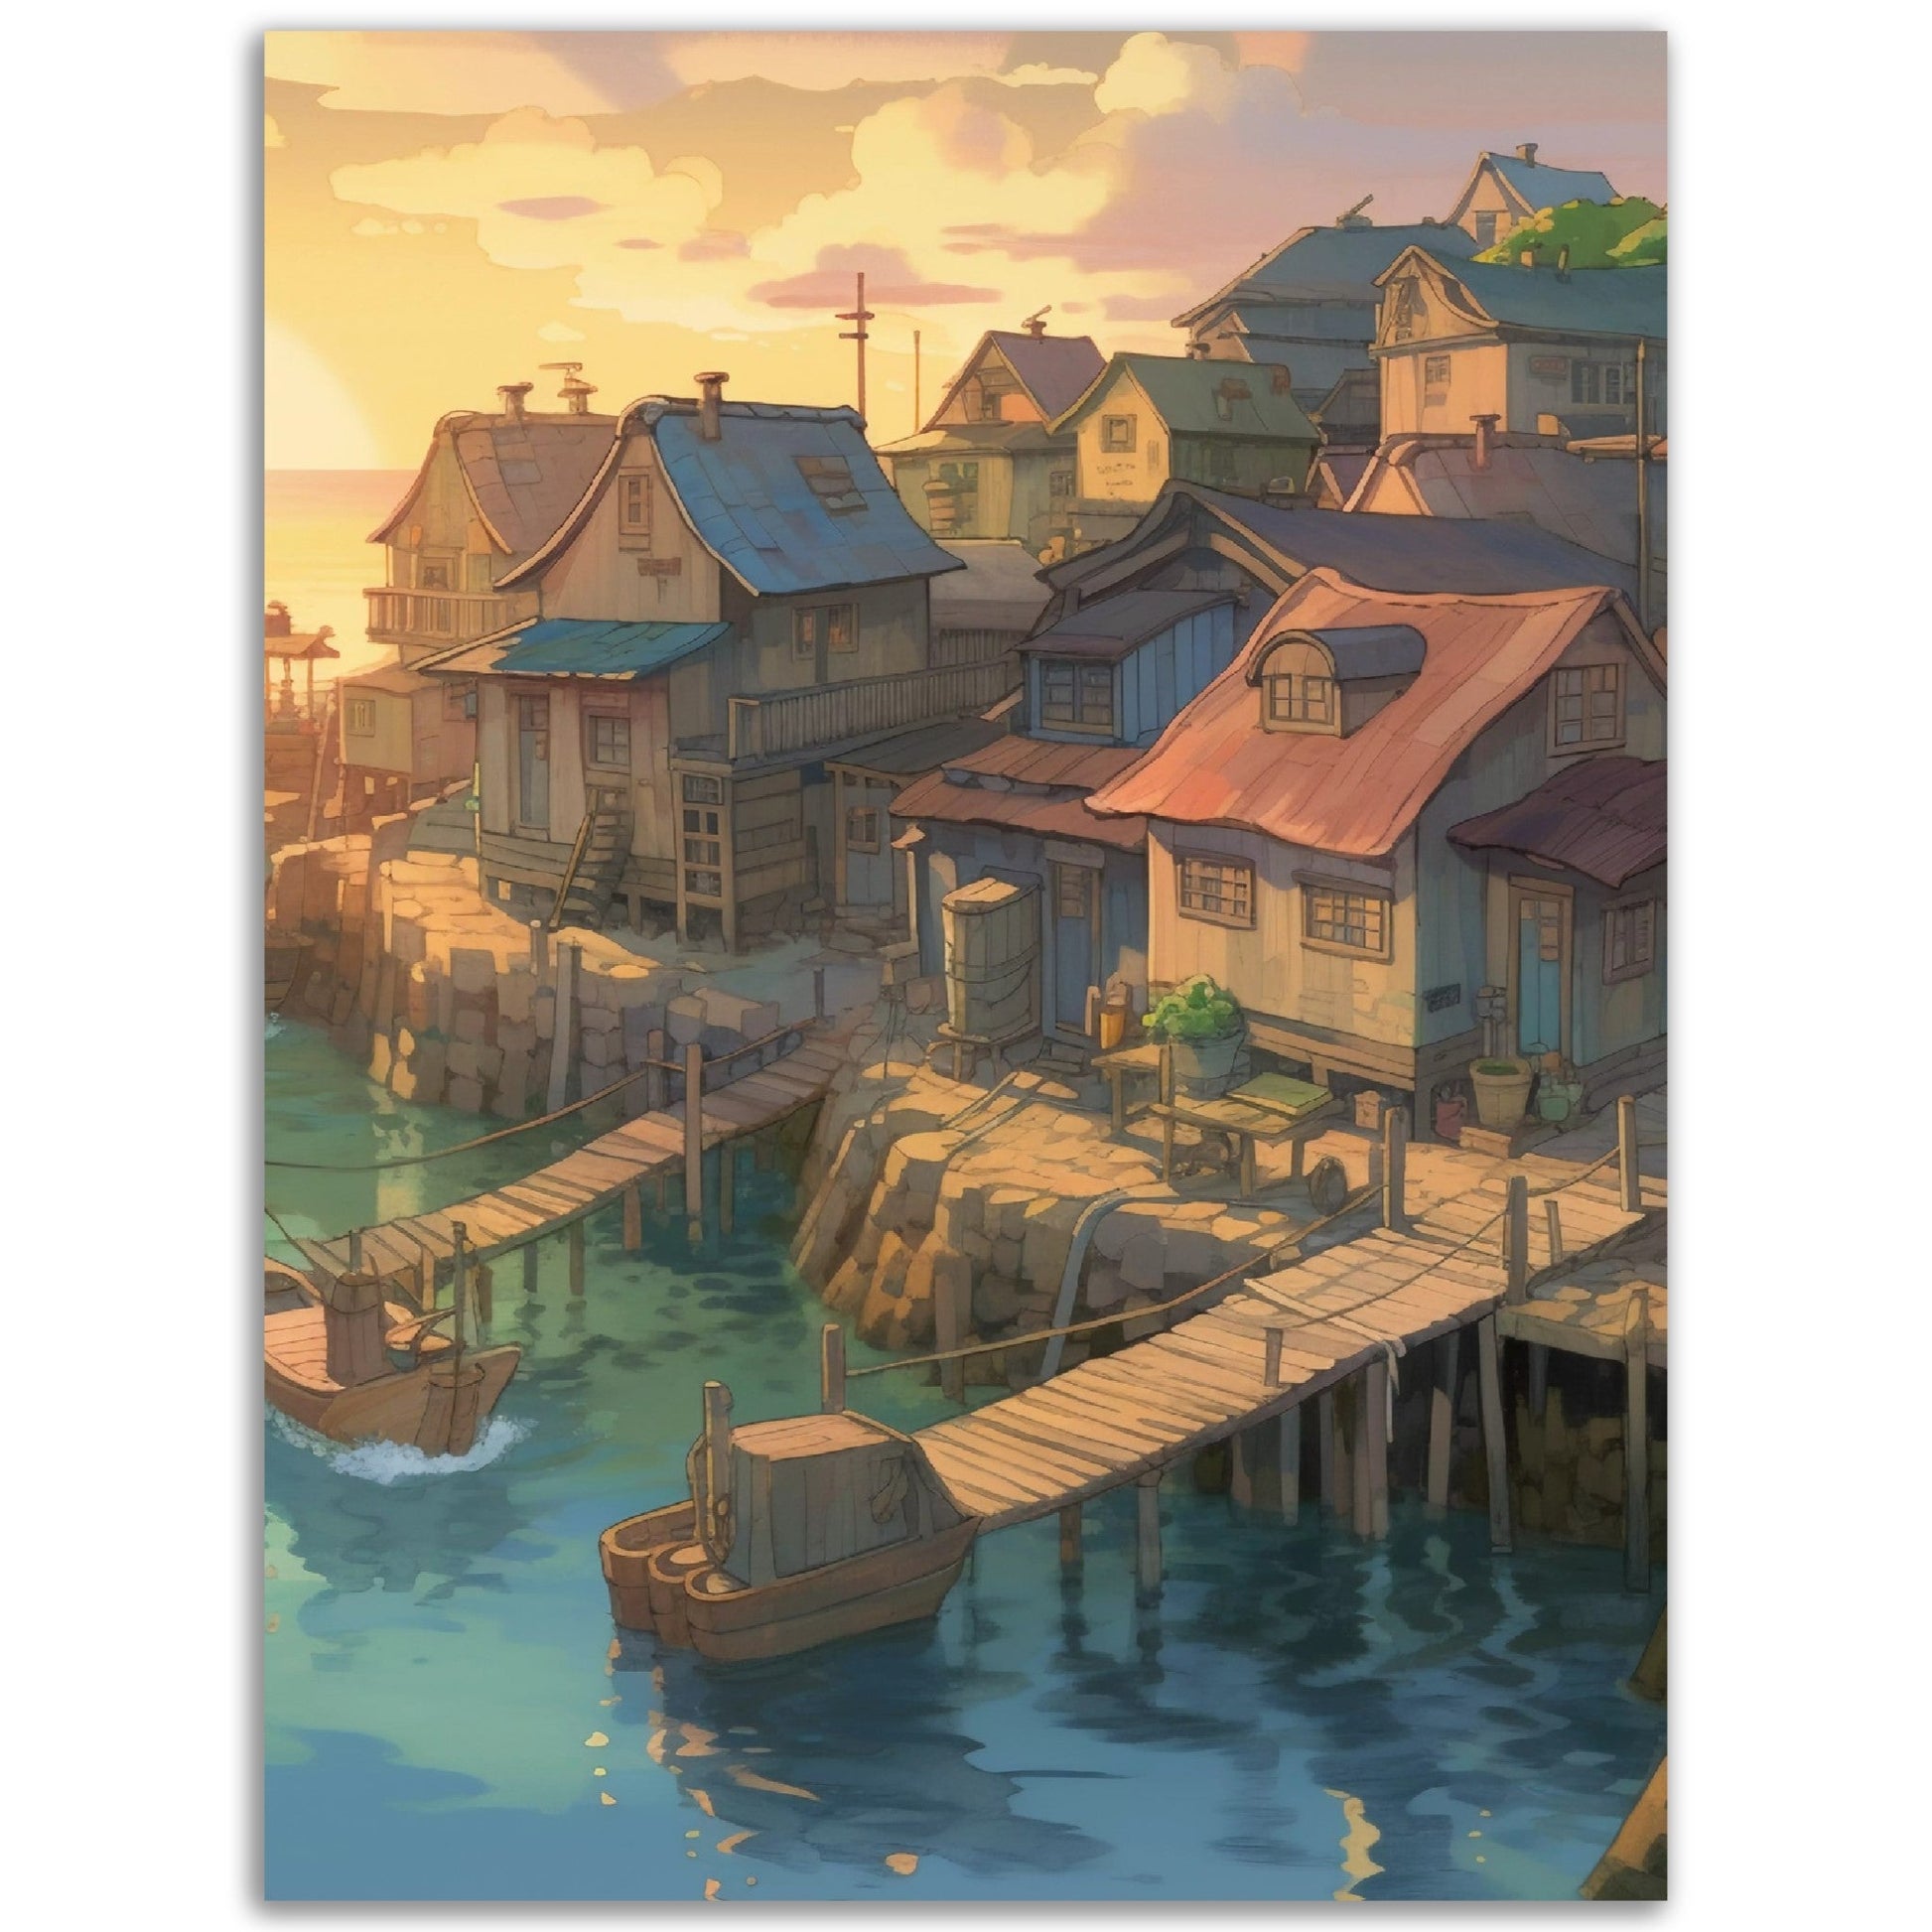 A captivating Animated Seaside Town featuring a picturesque village adorned with deliAnimalse brushstrokes, while enchanting boats grace the tranquil waters below.